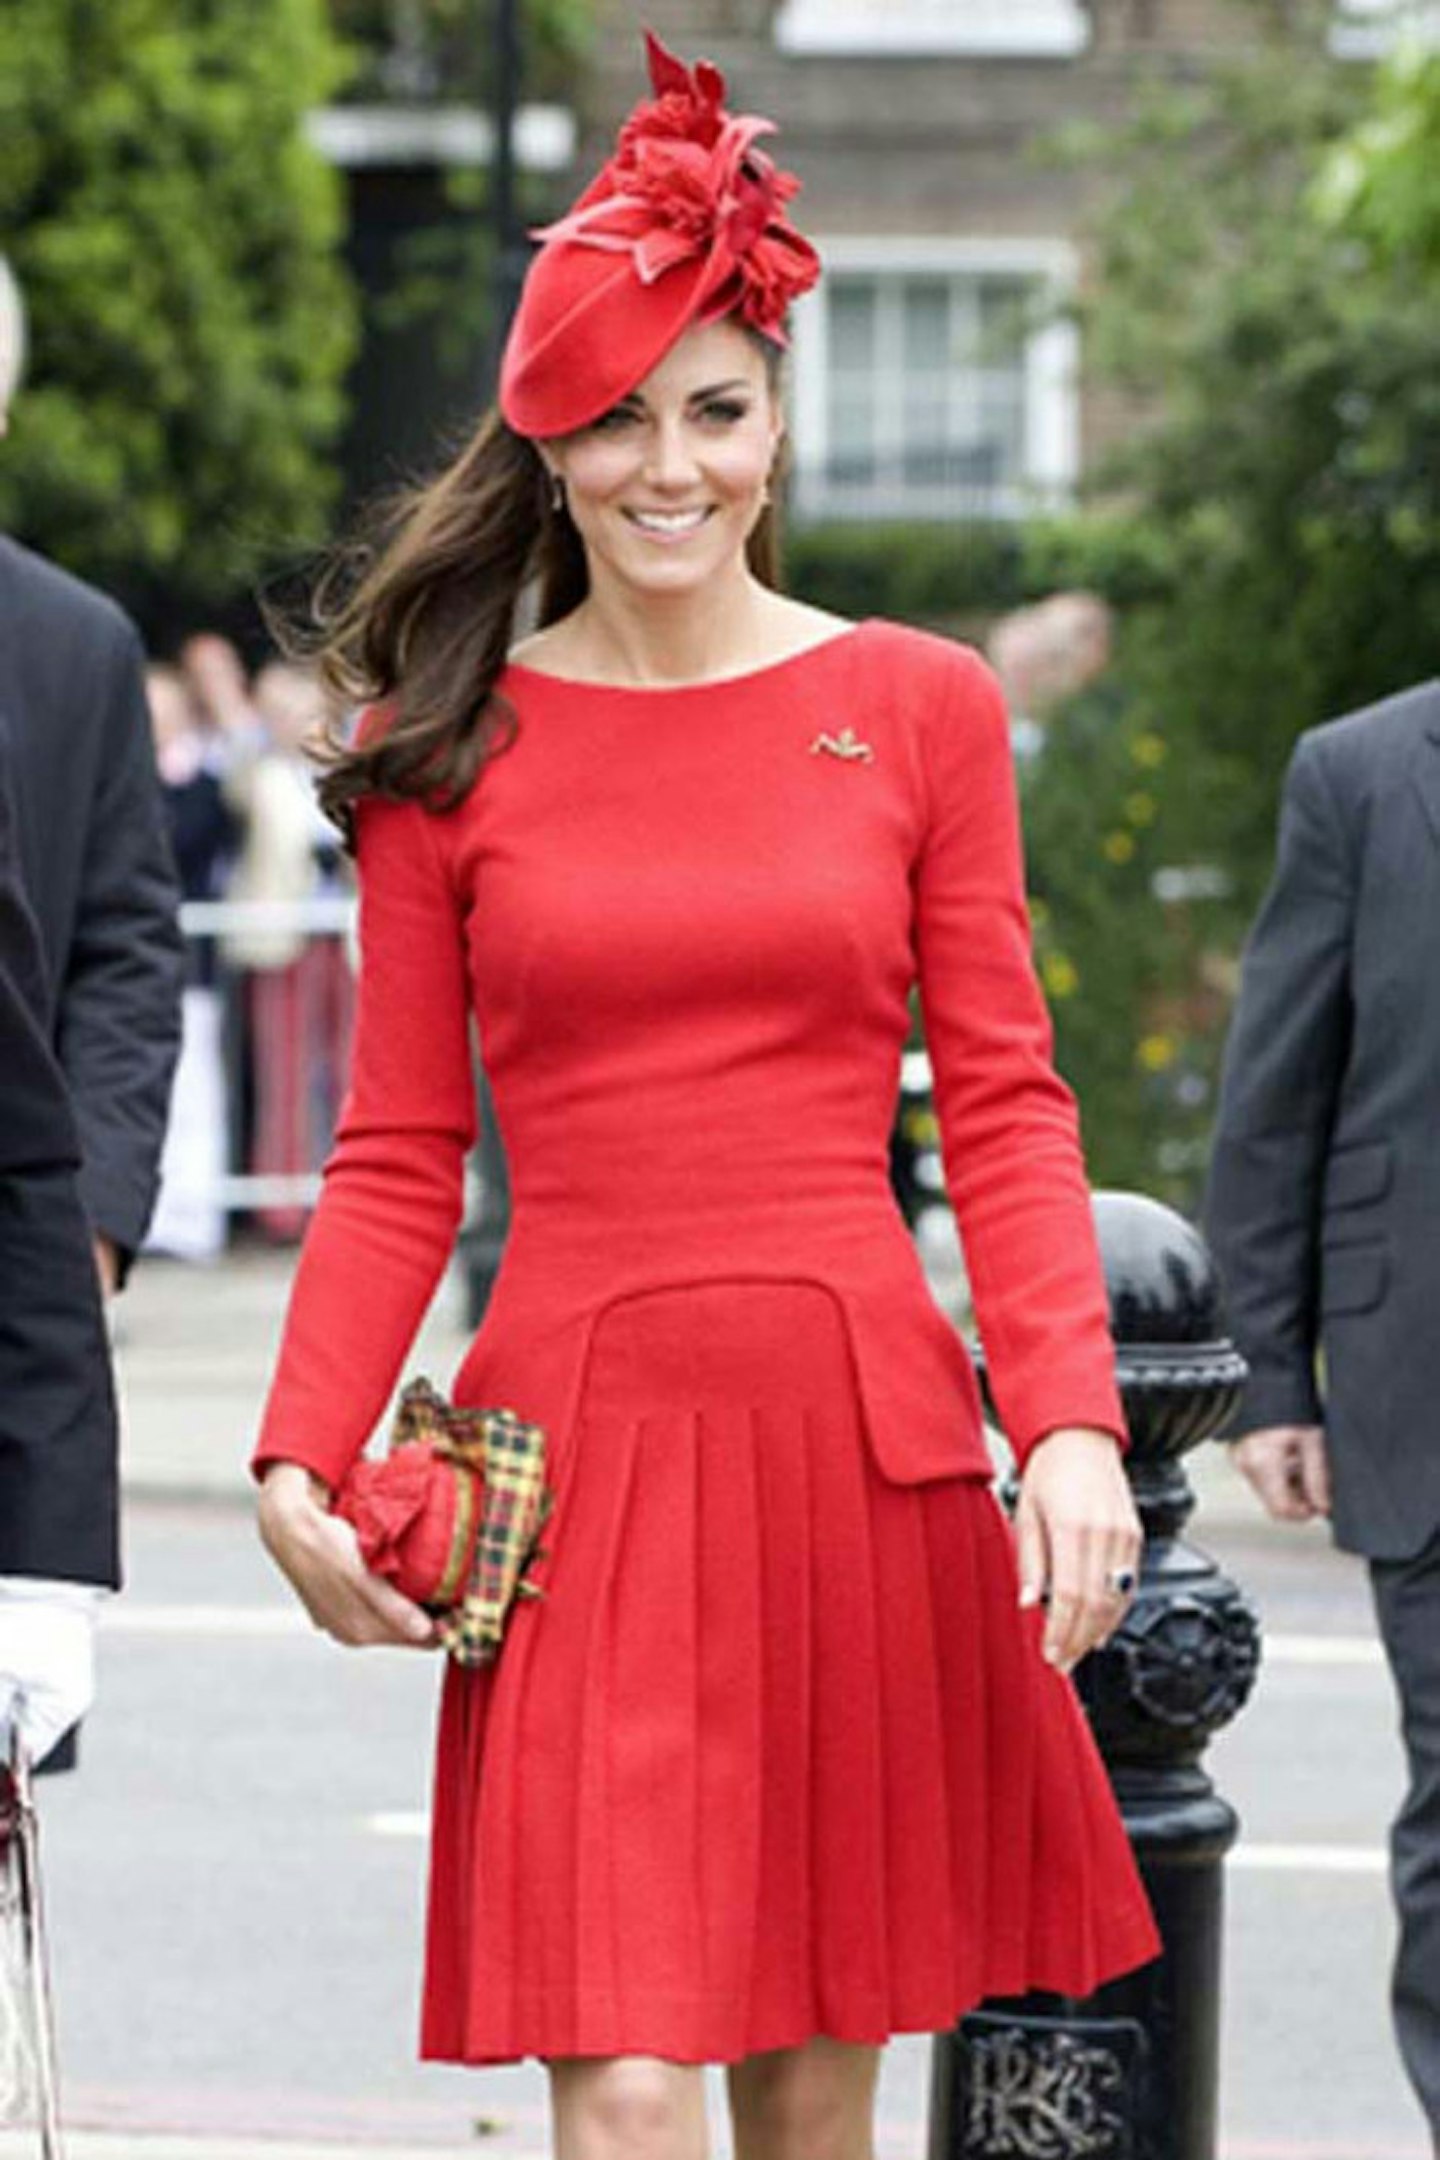 Kate Middleton wearing Alexander McQueen at The Queen's Jubilee River Pageant, London, 3 June 2012